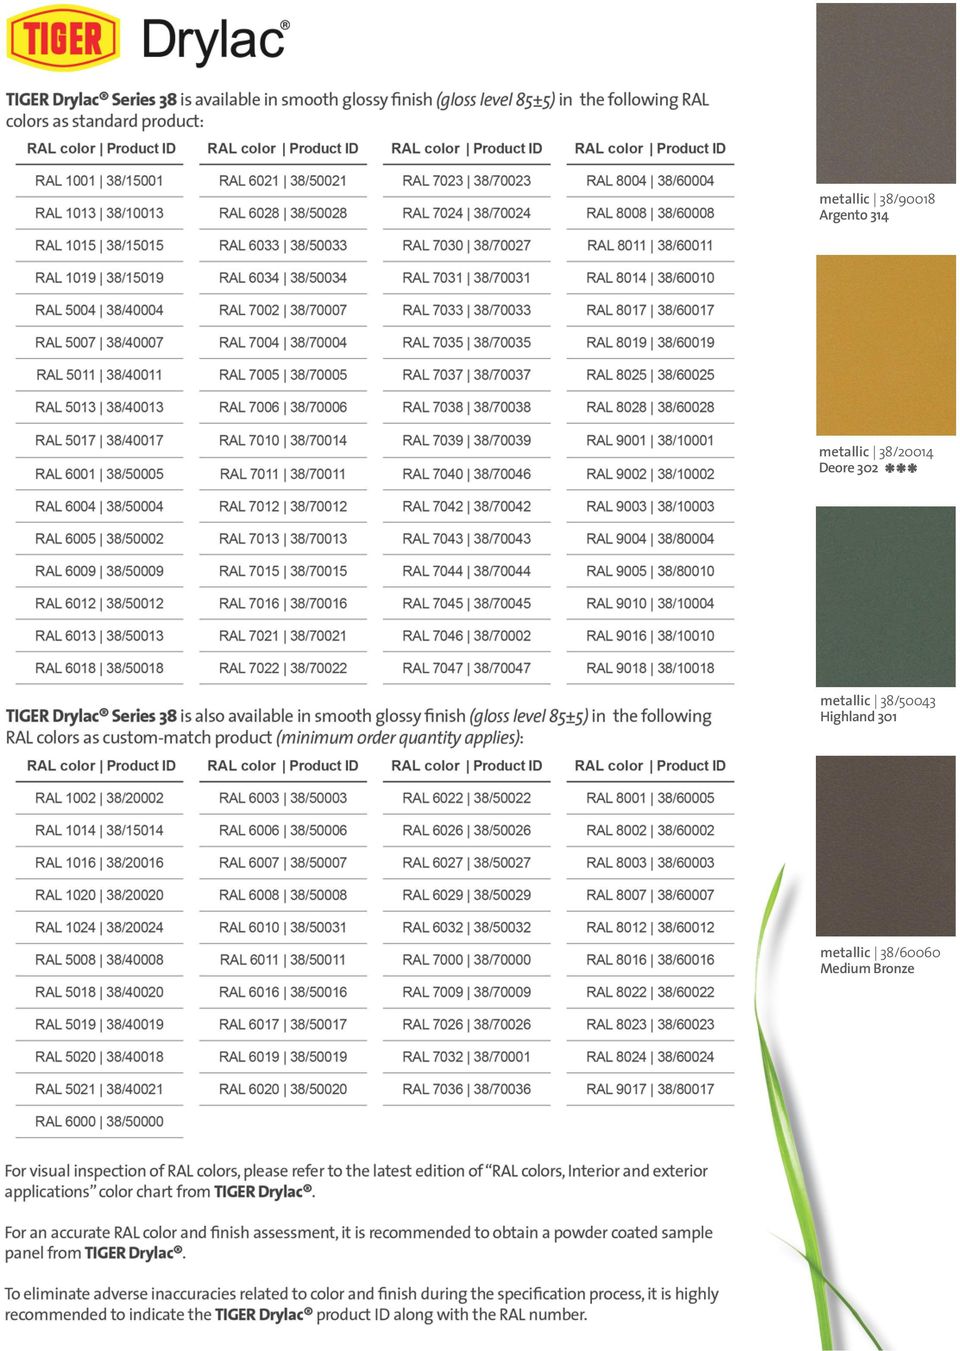 RAL color Product ID RAL color Product ID RAL color Product ...